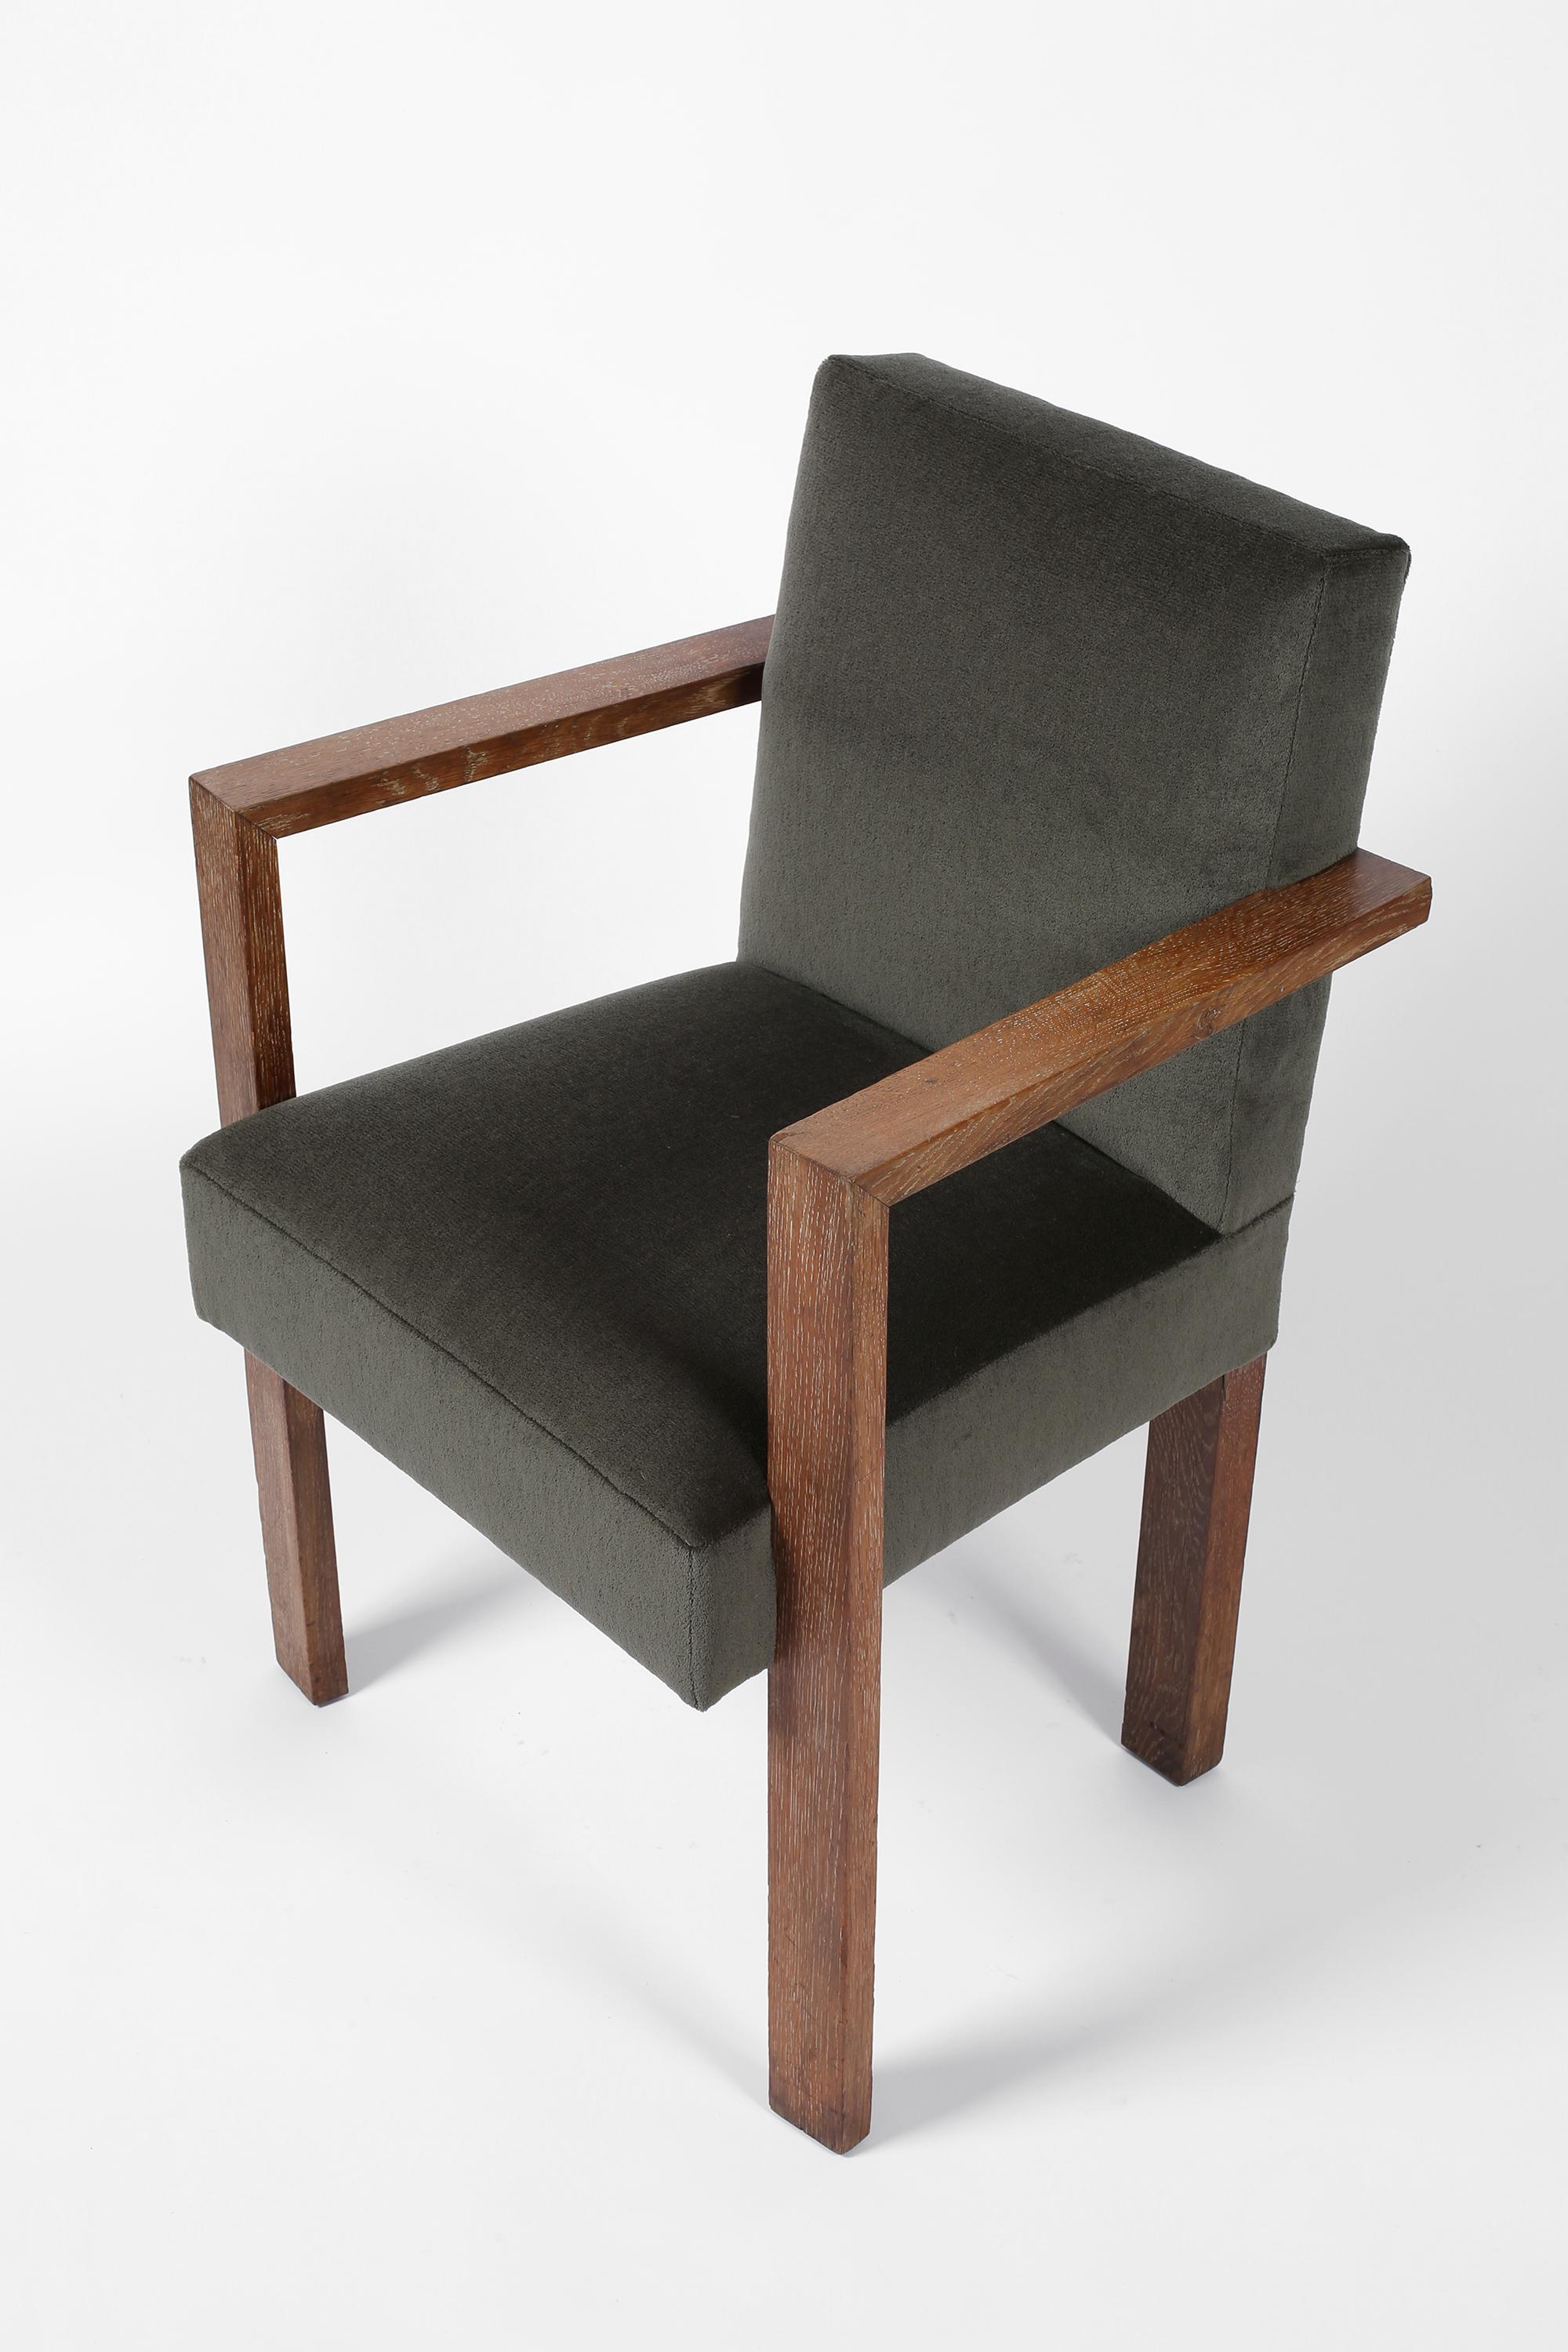 Mid-20th Century 1940s French Modernist Armchair in Limed Oak and Mohair